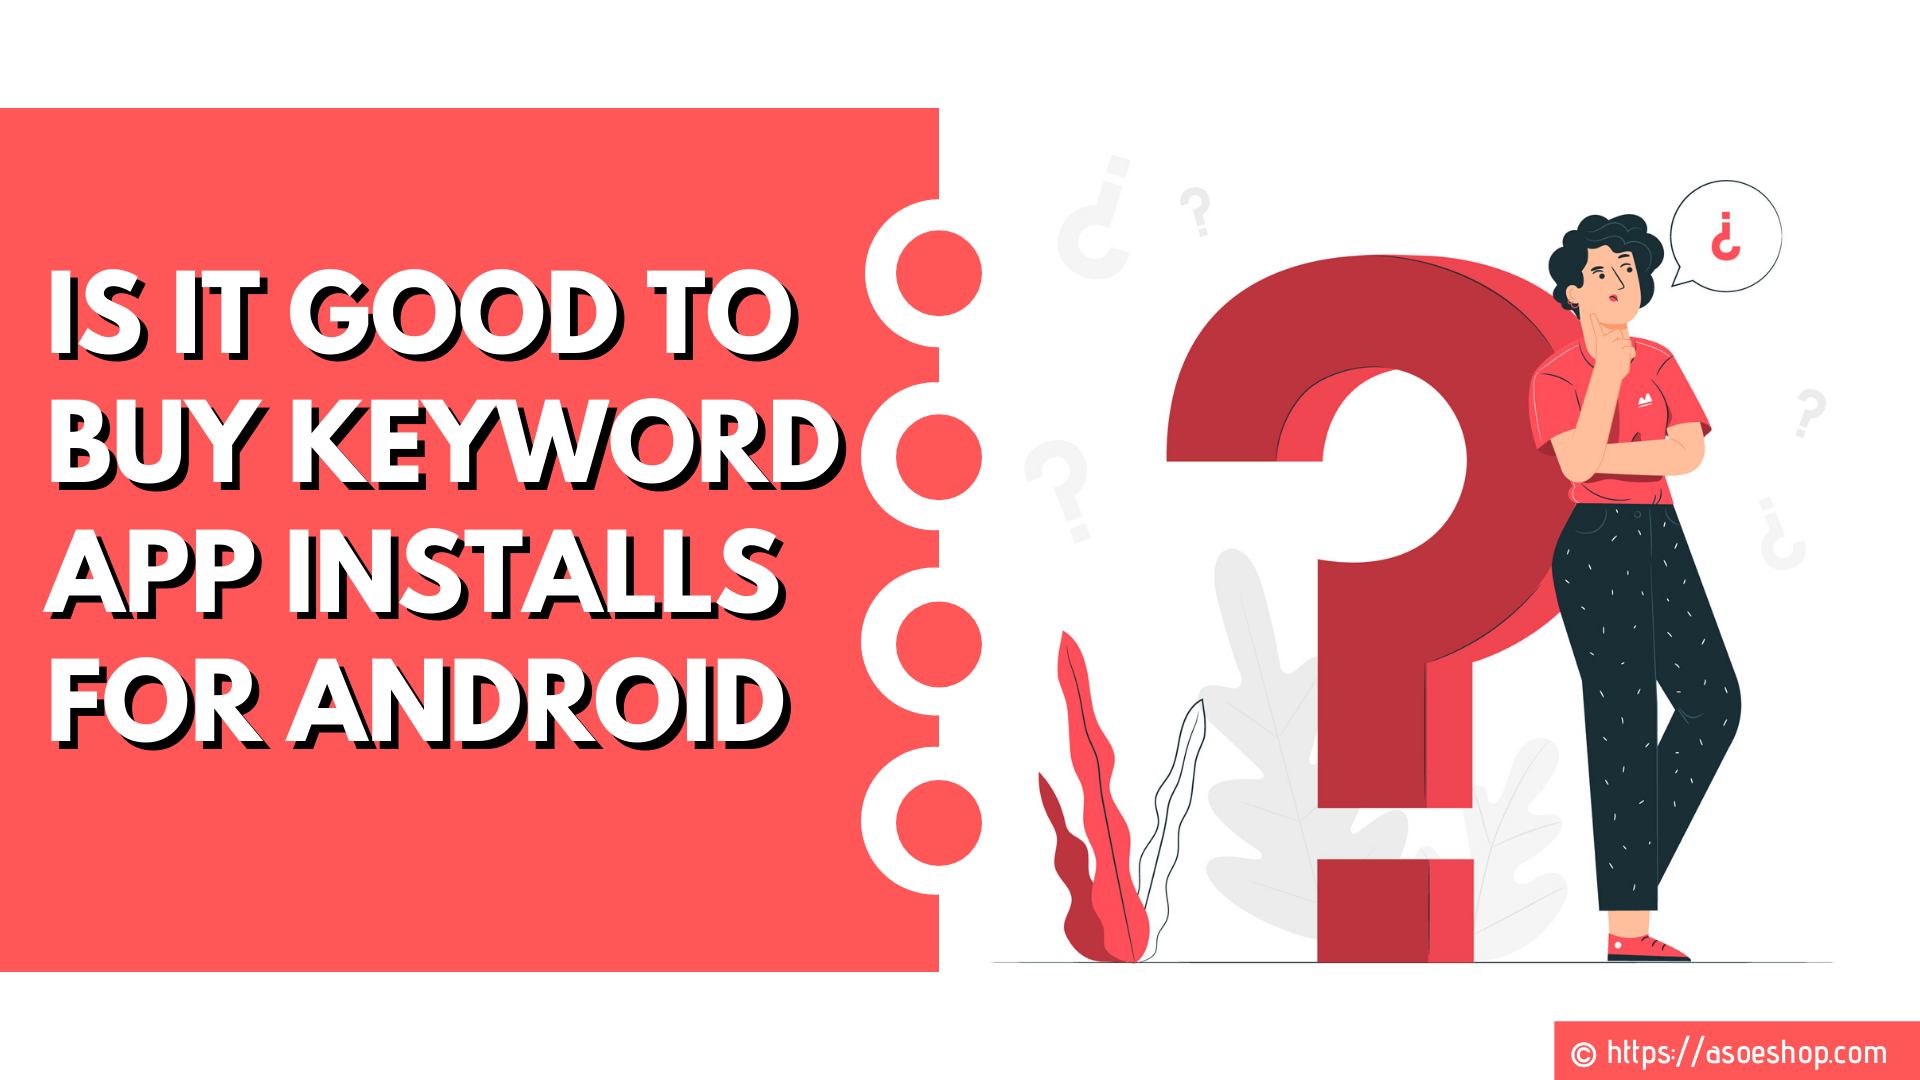 It is Good to Buy Keyword Installs for Android - Know Why